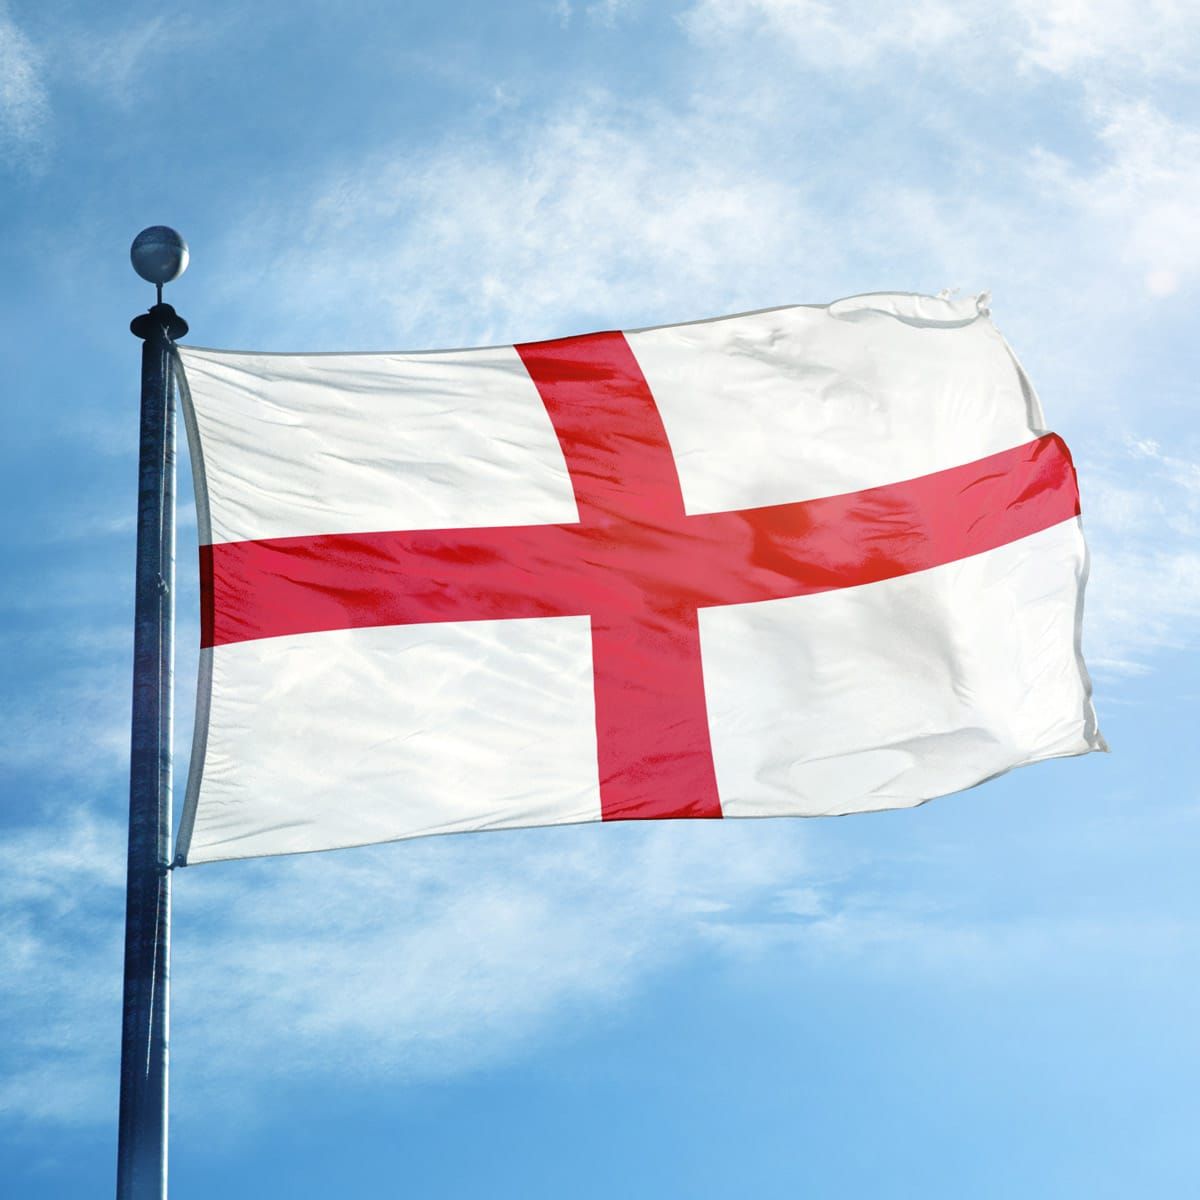 Happy St Georges Day to all those celebrating from Ramsgate Tunnels Volunteers, Trustees and Staff. #stgeorgesday #ramsgatetunnels